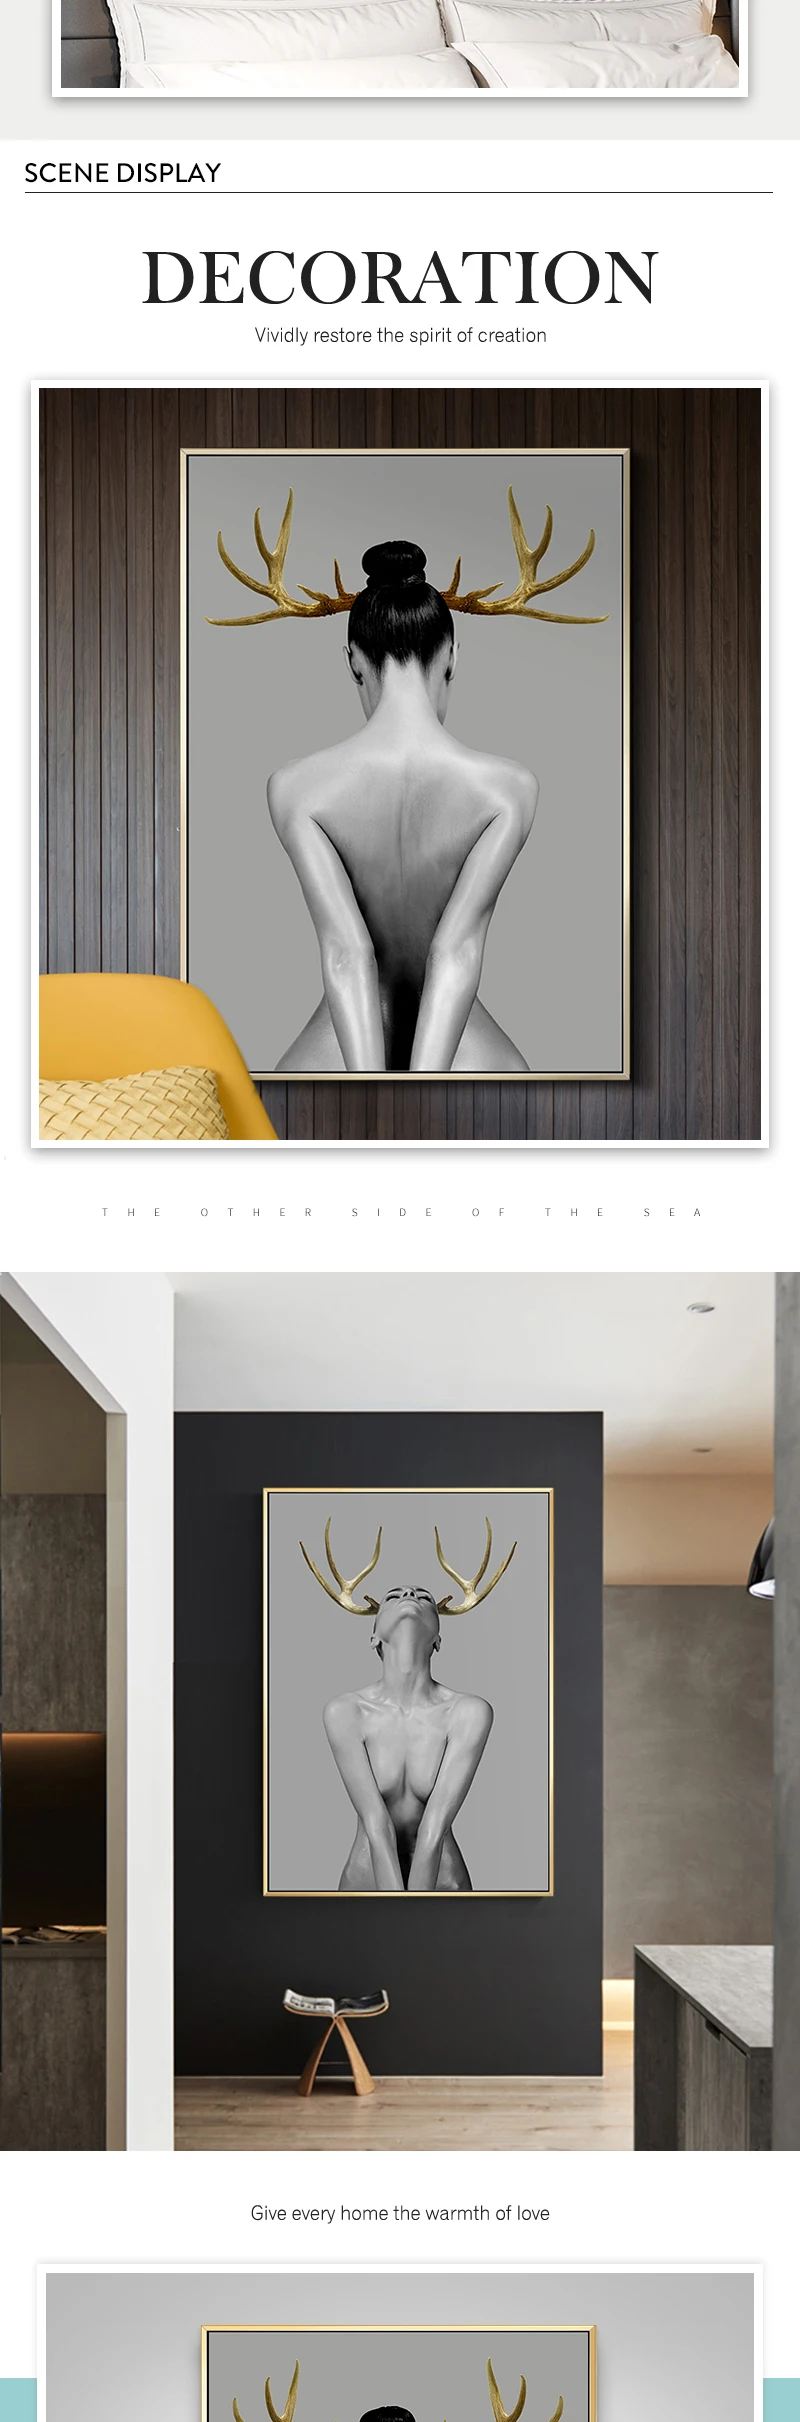 HTB1S.Z8PrrpK1RjSZTEq6AWAVXab Nordic Antlers girls Figuars wall art Canvas Painting Prints Posters Black White Nude art Pictures for Living Room Morden Decor